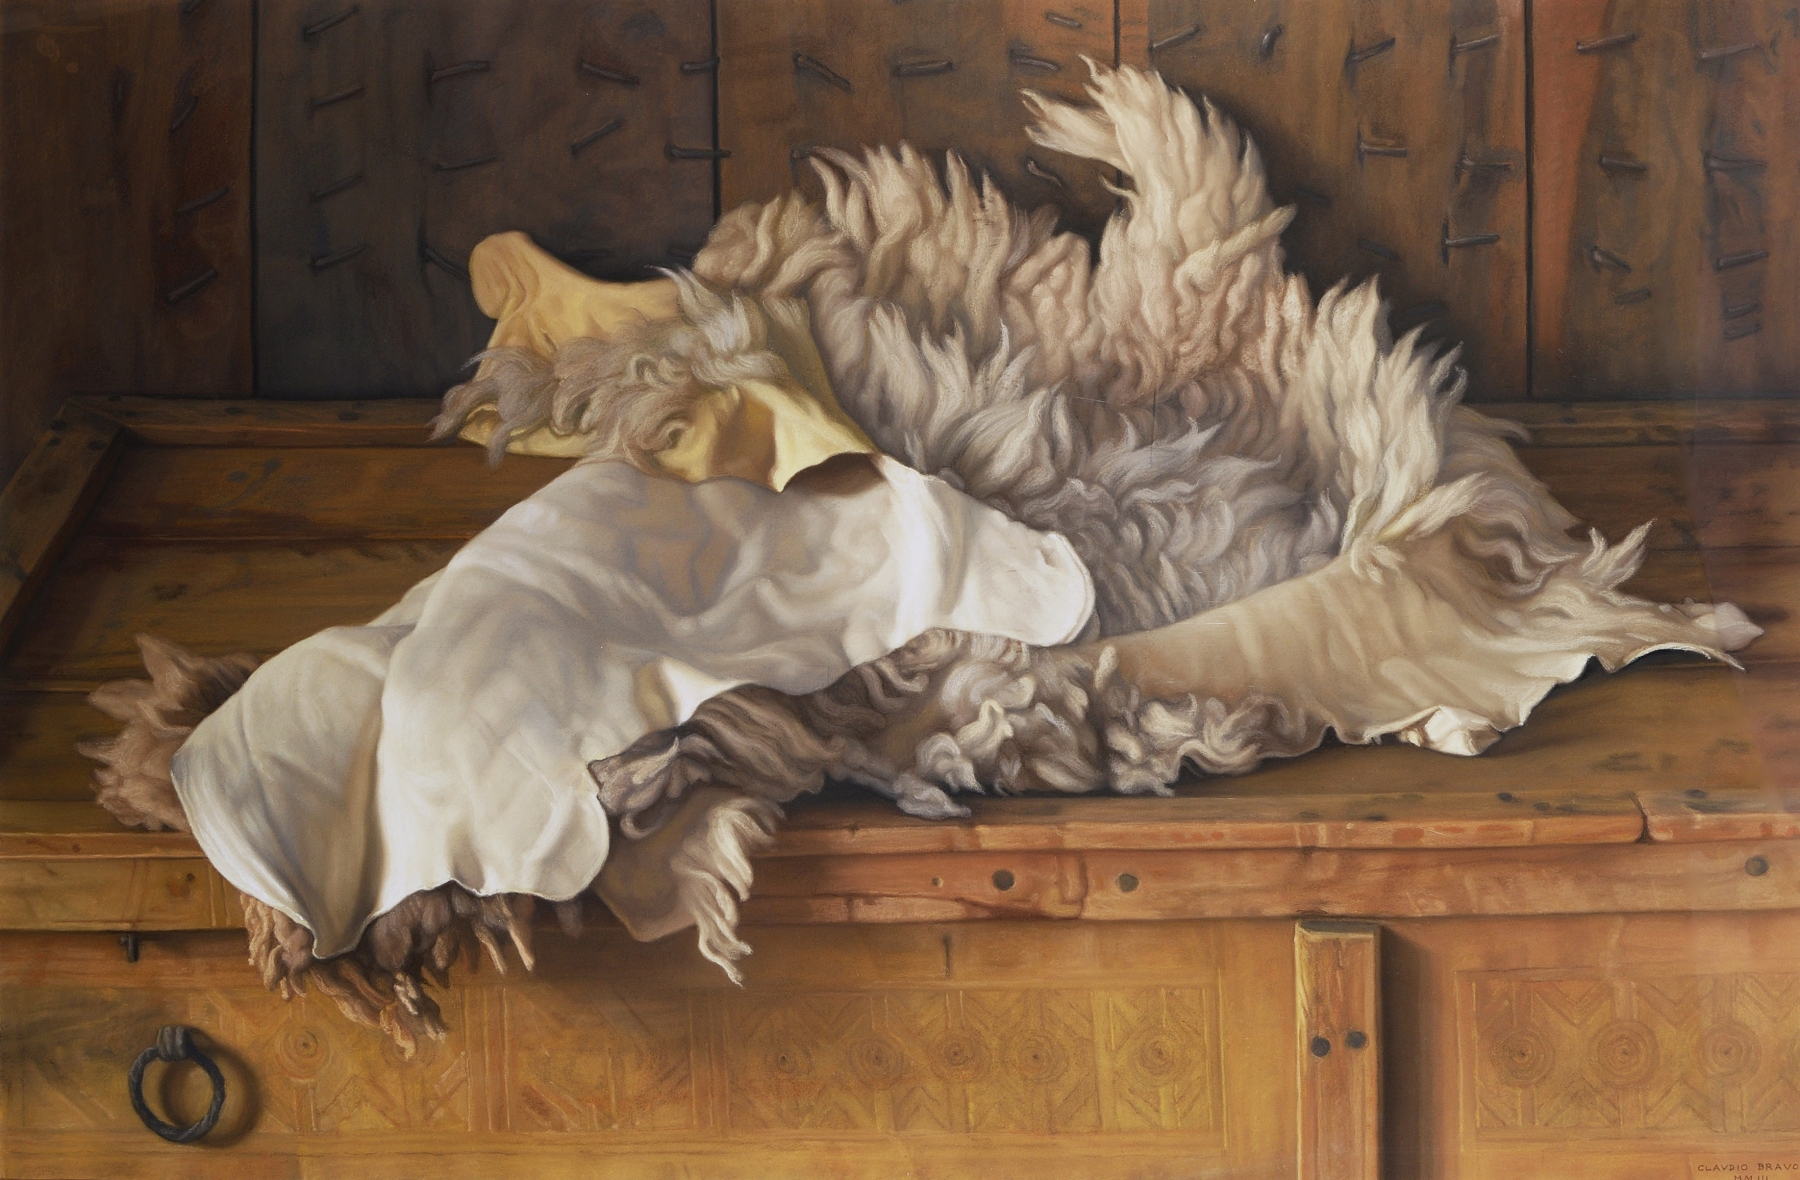 Lamb Skin,&nbsp;2003
pastel on paper
29 1/8 x 42 7/8 inches